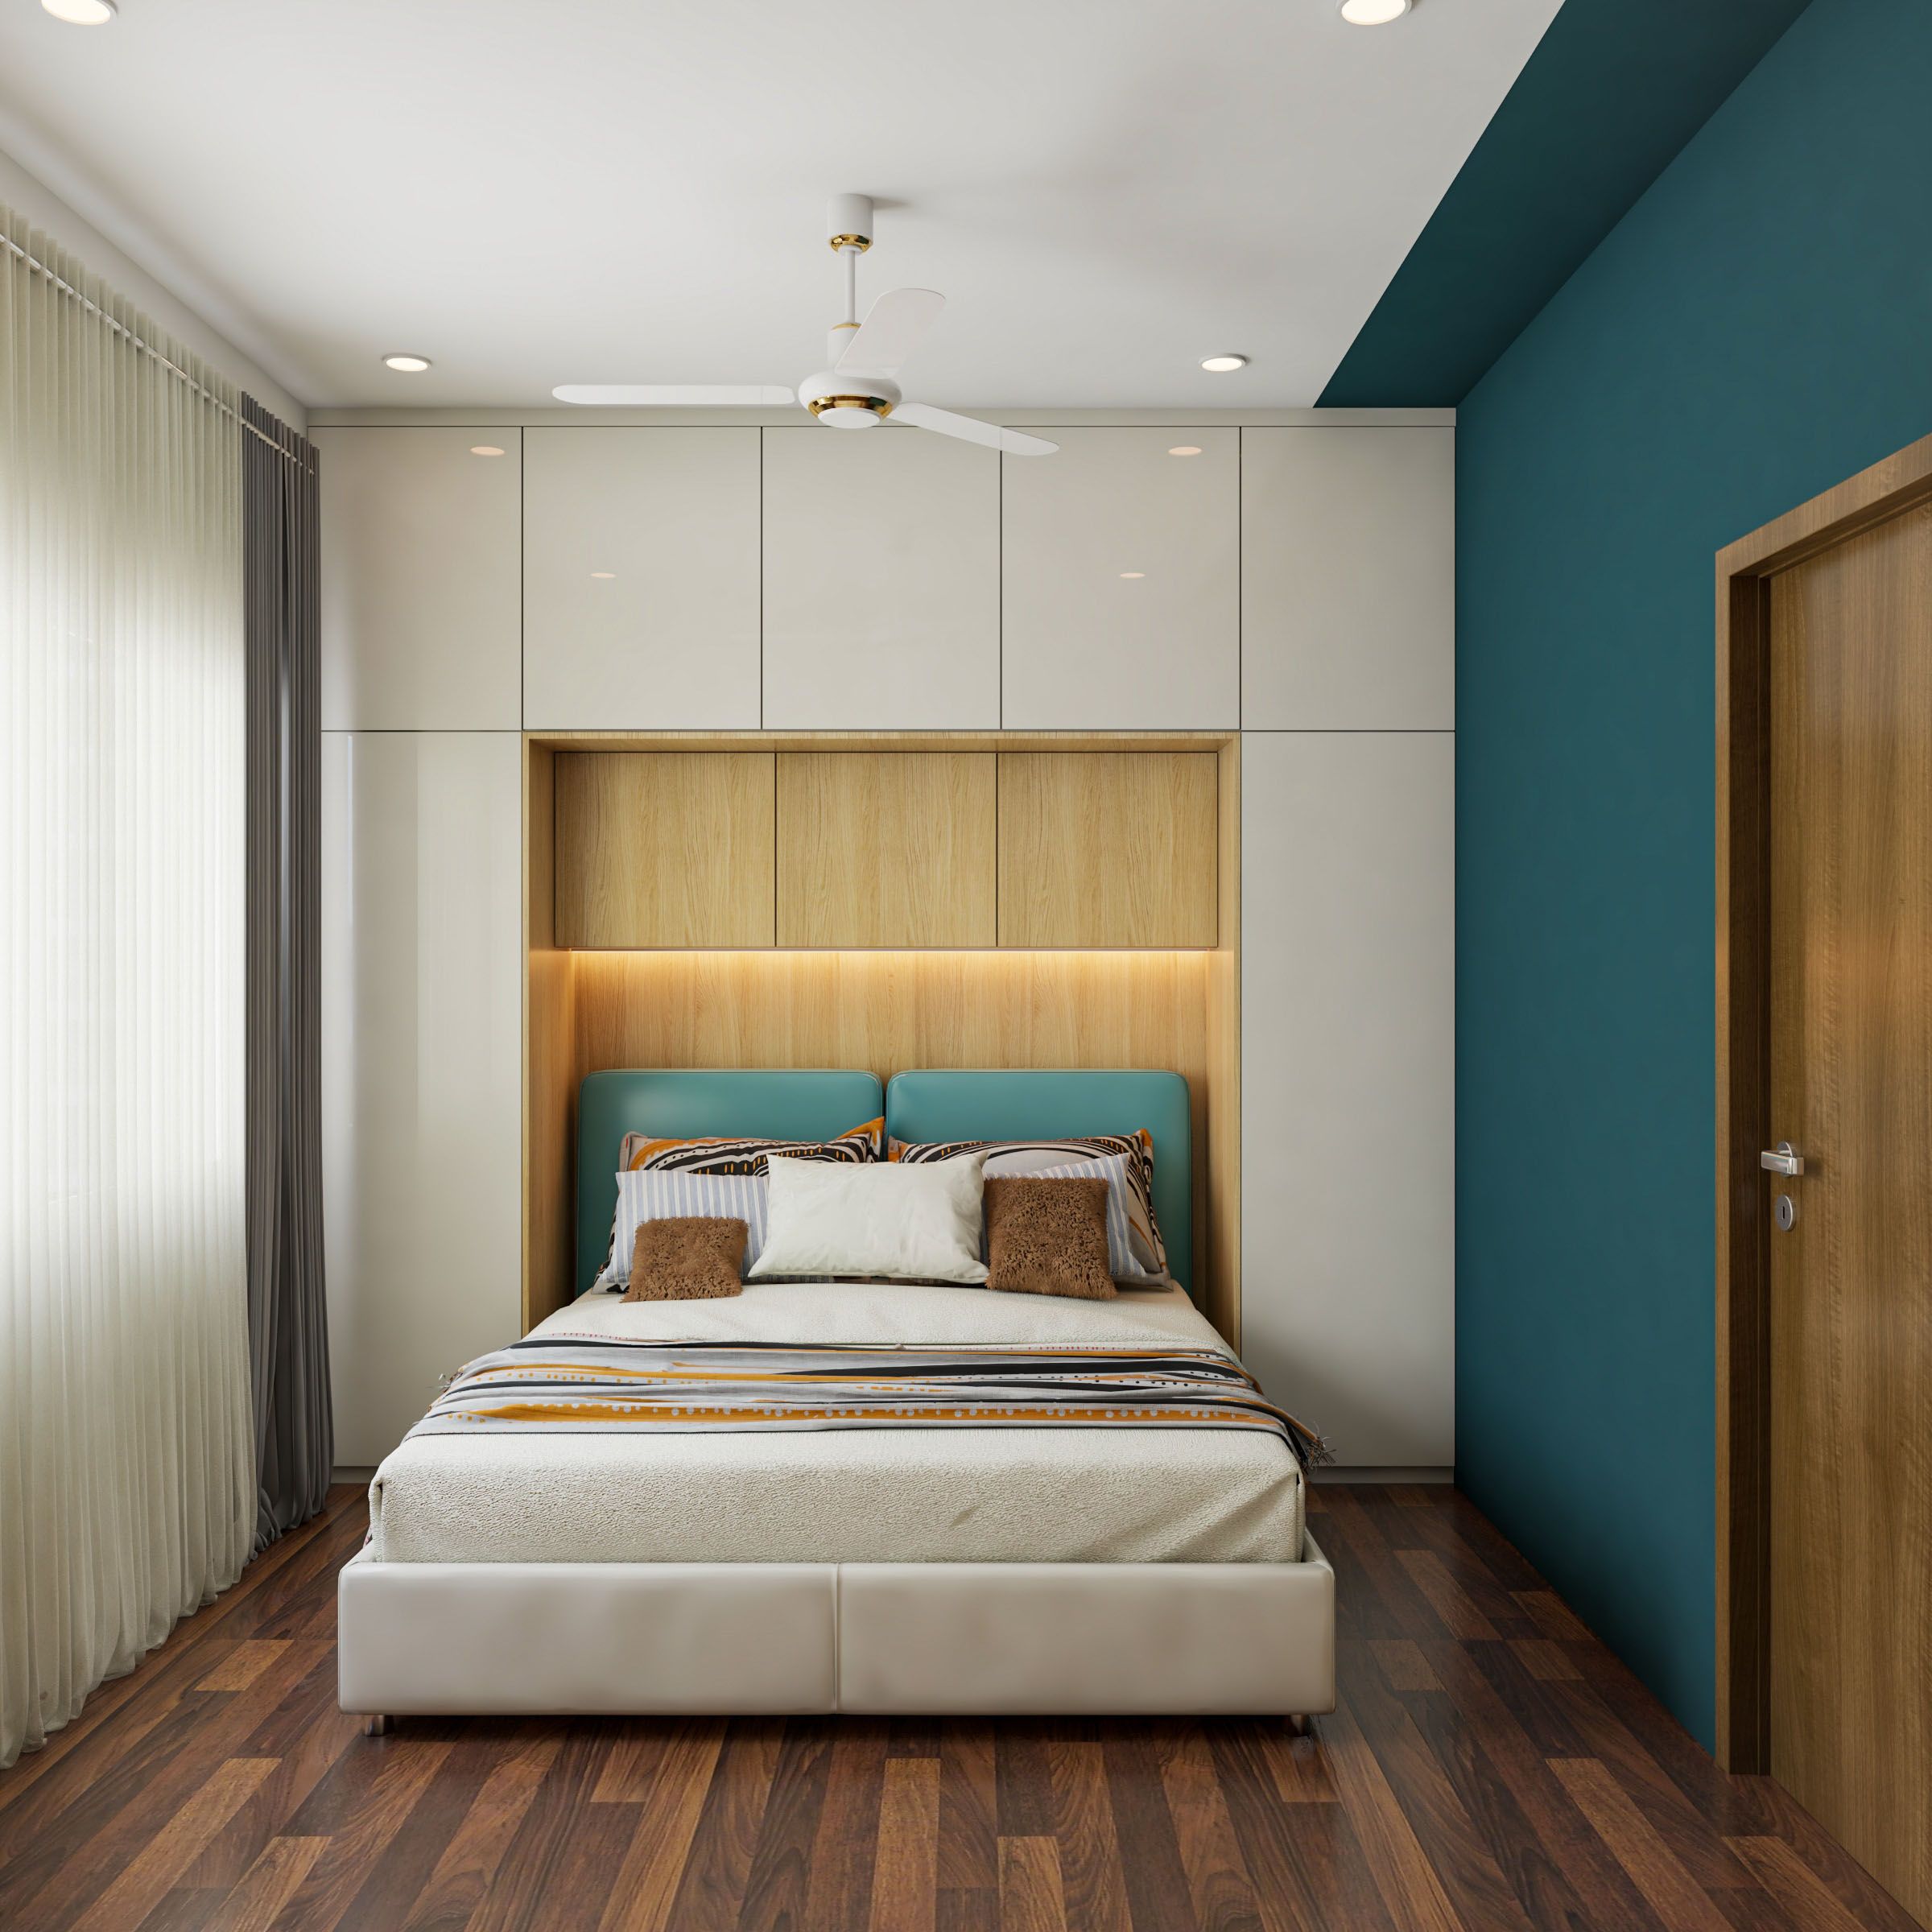 Contemporary Off-White And Teal Master Bedroom With Space-Saving Furniture